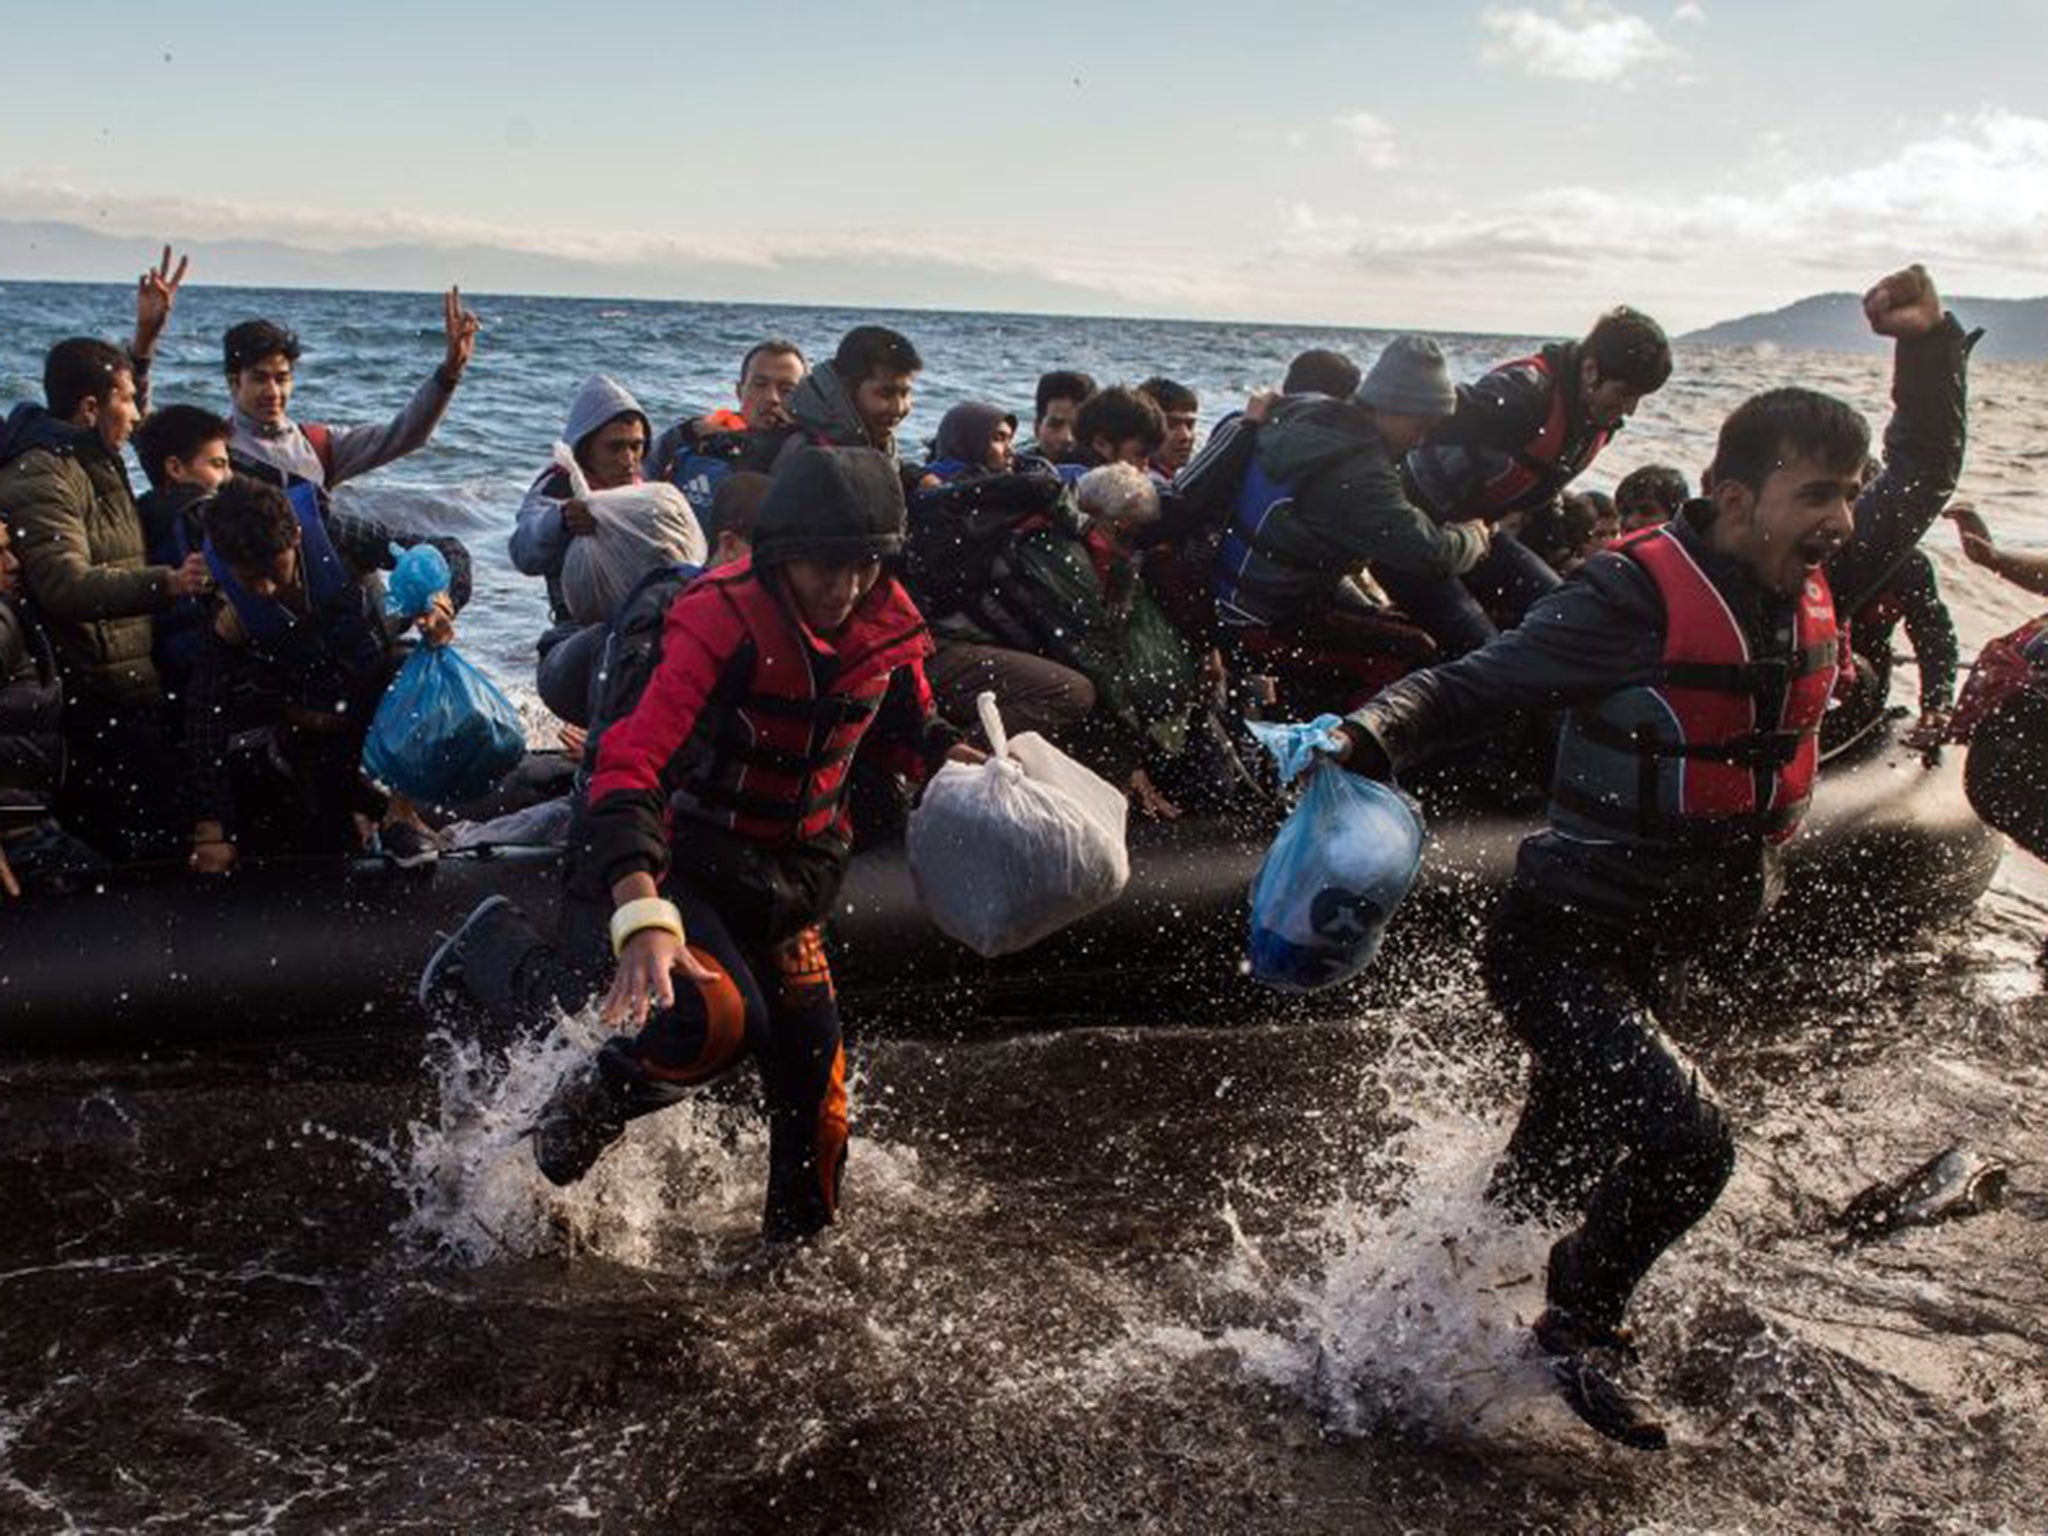 Asylum-seekers and migrants express relief as they go ashore at Lesbos